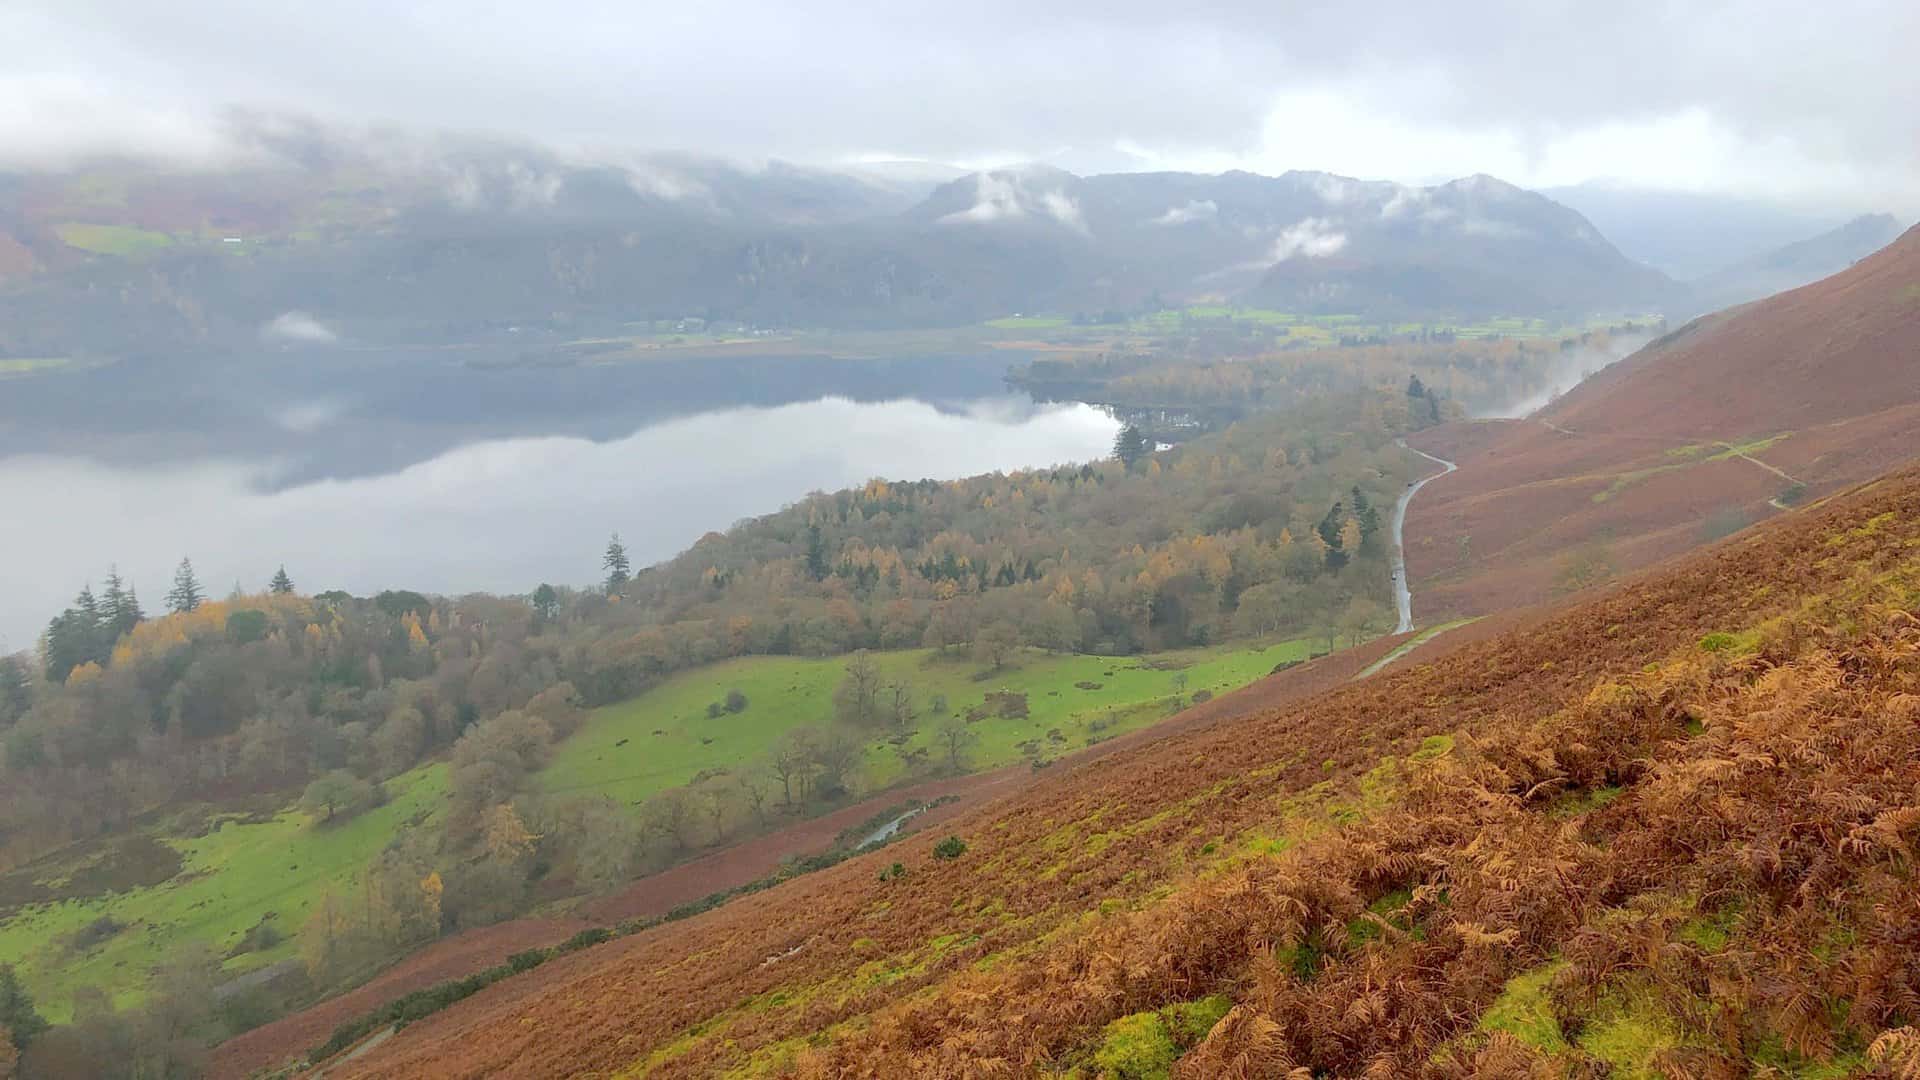 Looking towards the southern end of Derwent Water from Skelgill Bank.